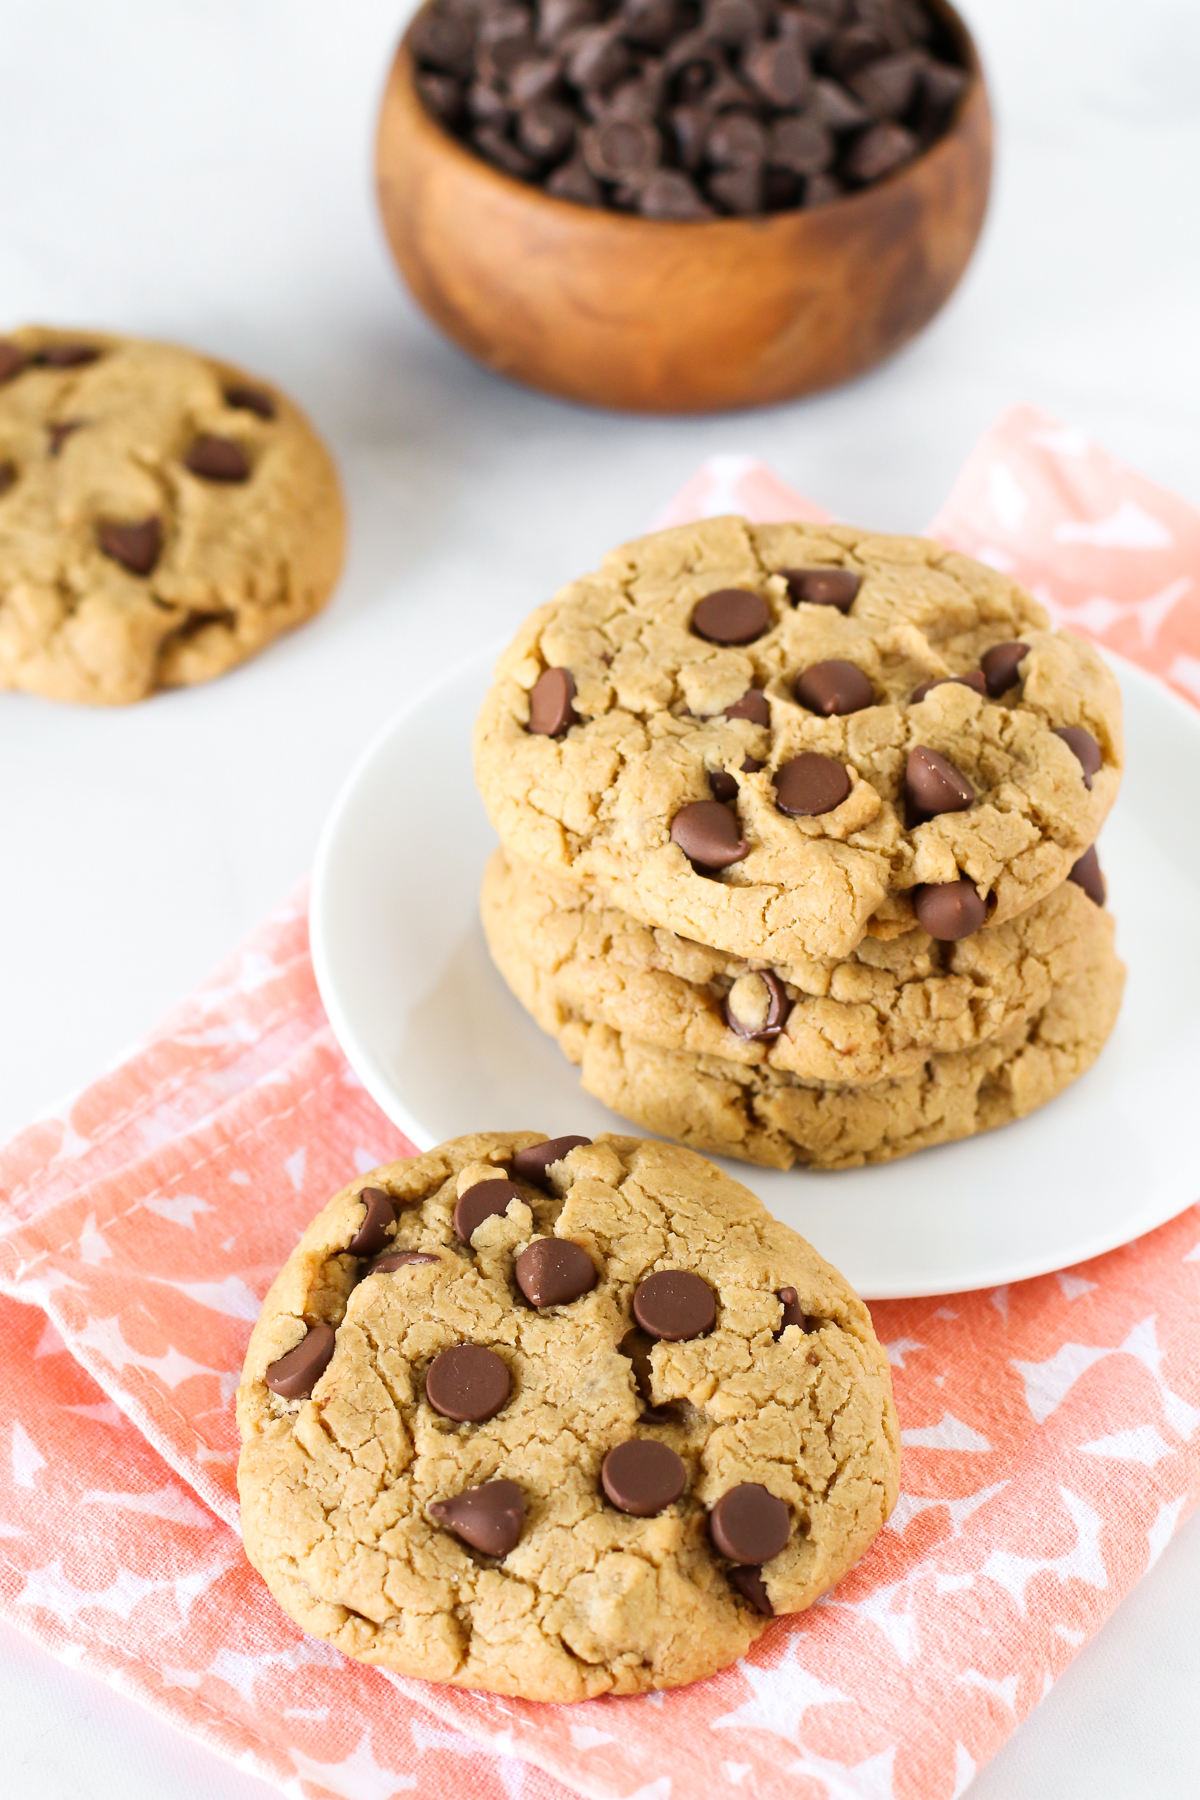 Gluten Free Vegan Peanut Butter Chocolate Chip Cookies. For all of you PB and chocolate lovers out there, these cookies are for you!